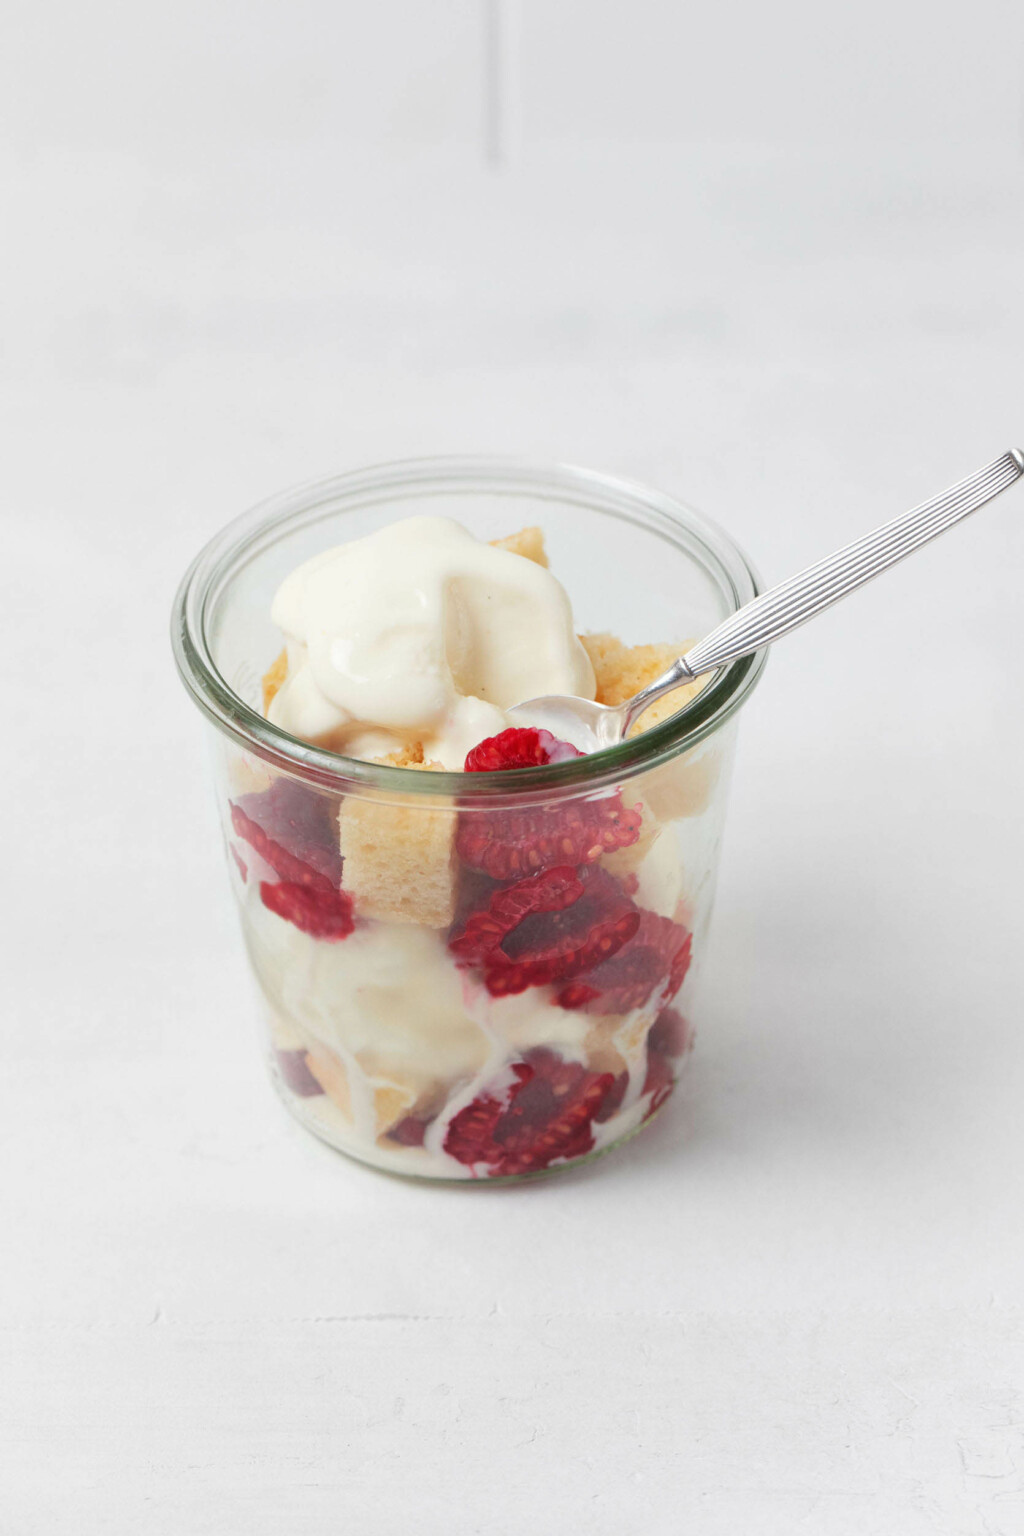 A small, clear glass mason jar holds berries, vegan cake, and vanilla ice cream that's just barely melting. It rests on a white surface.